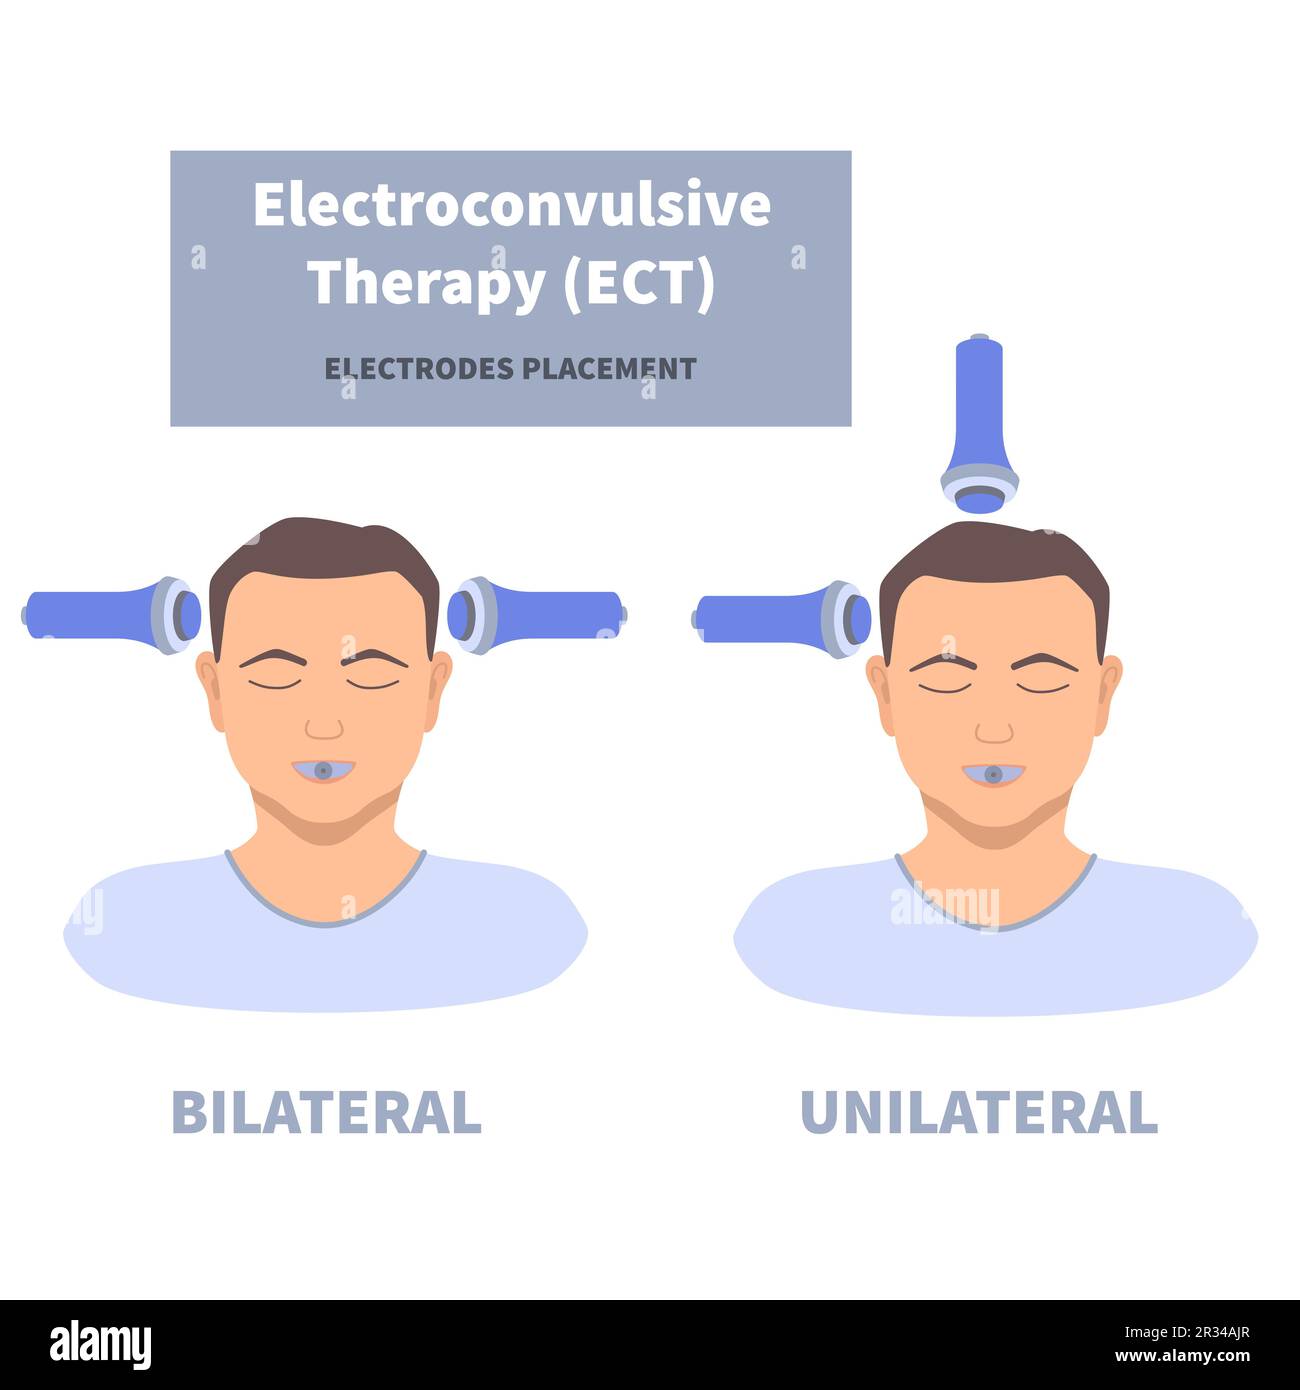 Demystifying Electroconvulsive Therapy (ECT)